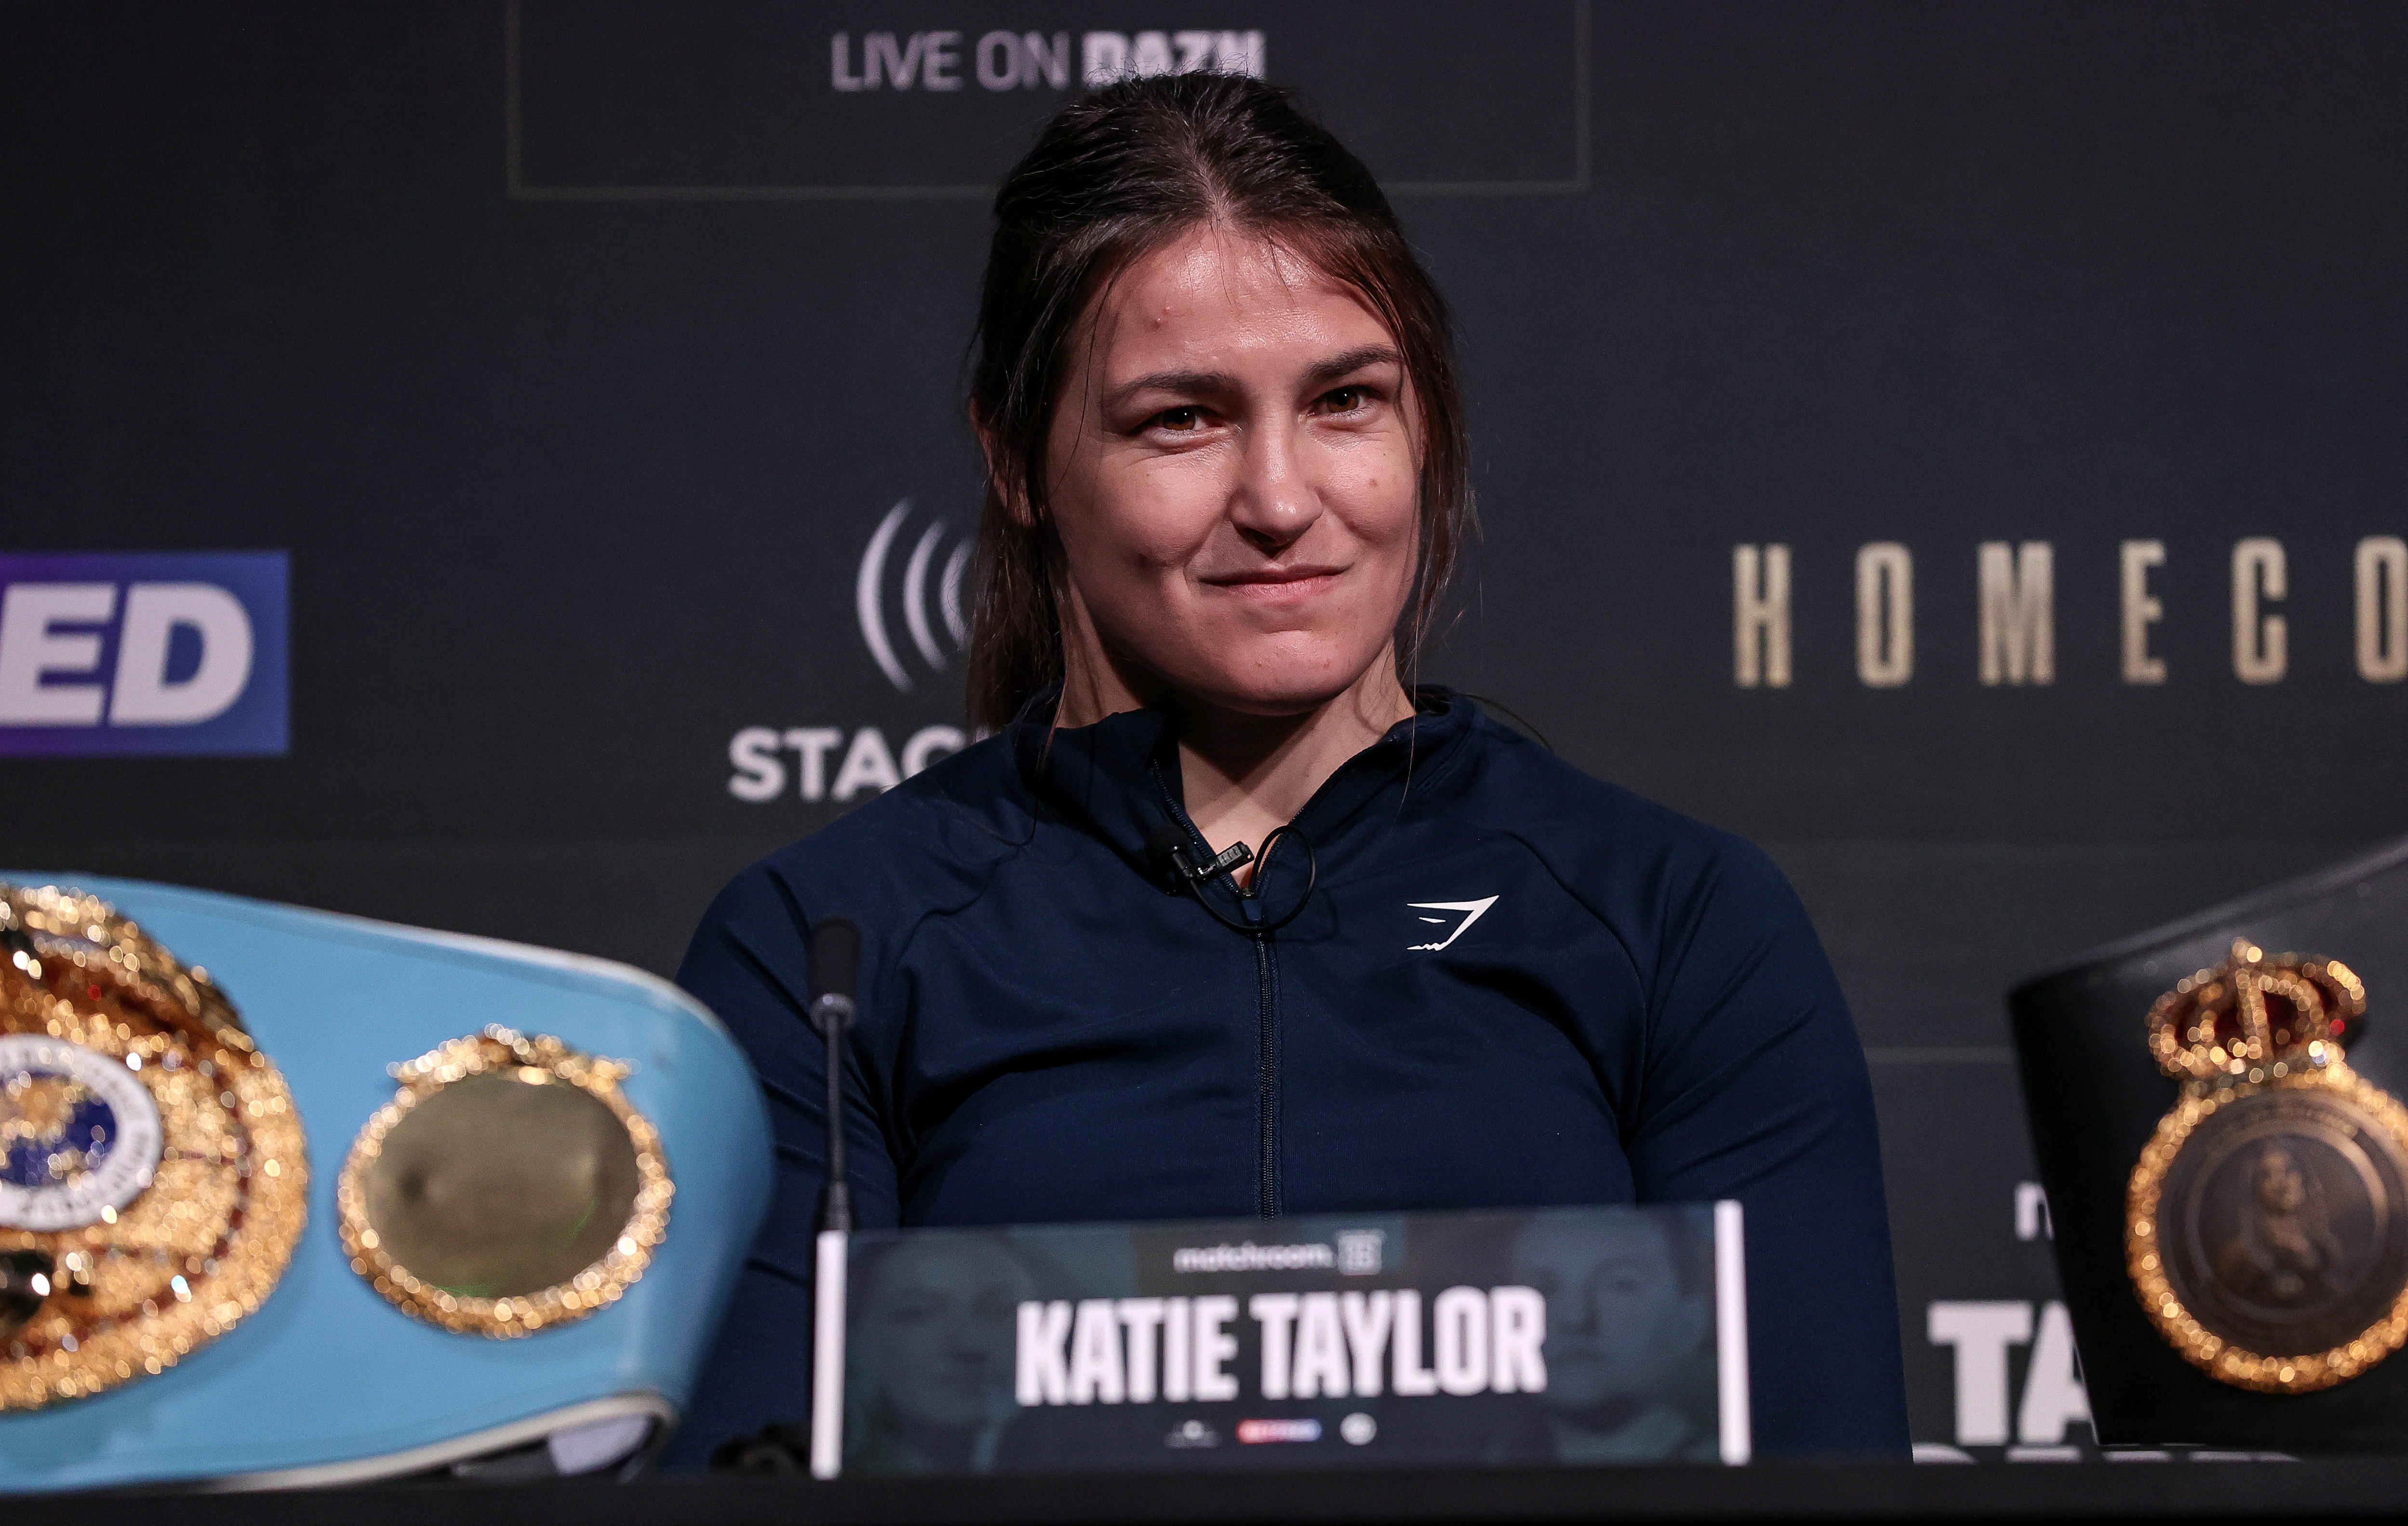 Only a handful of expensive tickets remain for Katie Taylors 3Arena bout